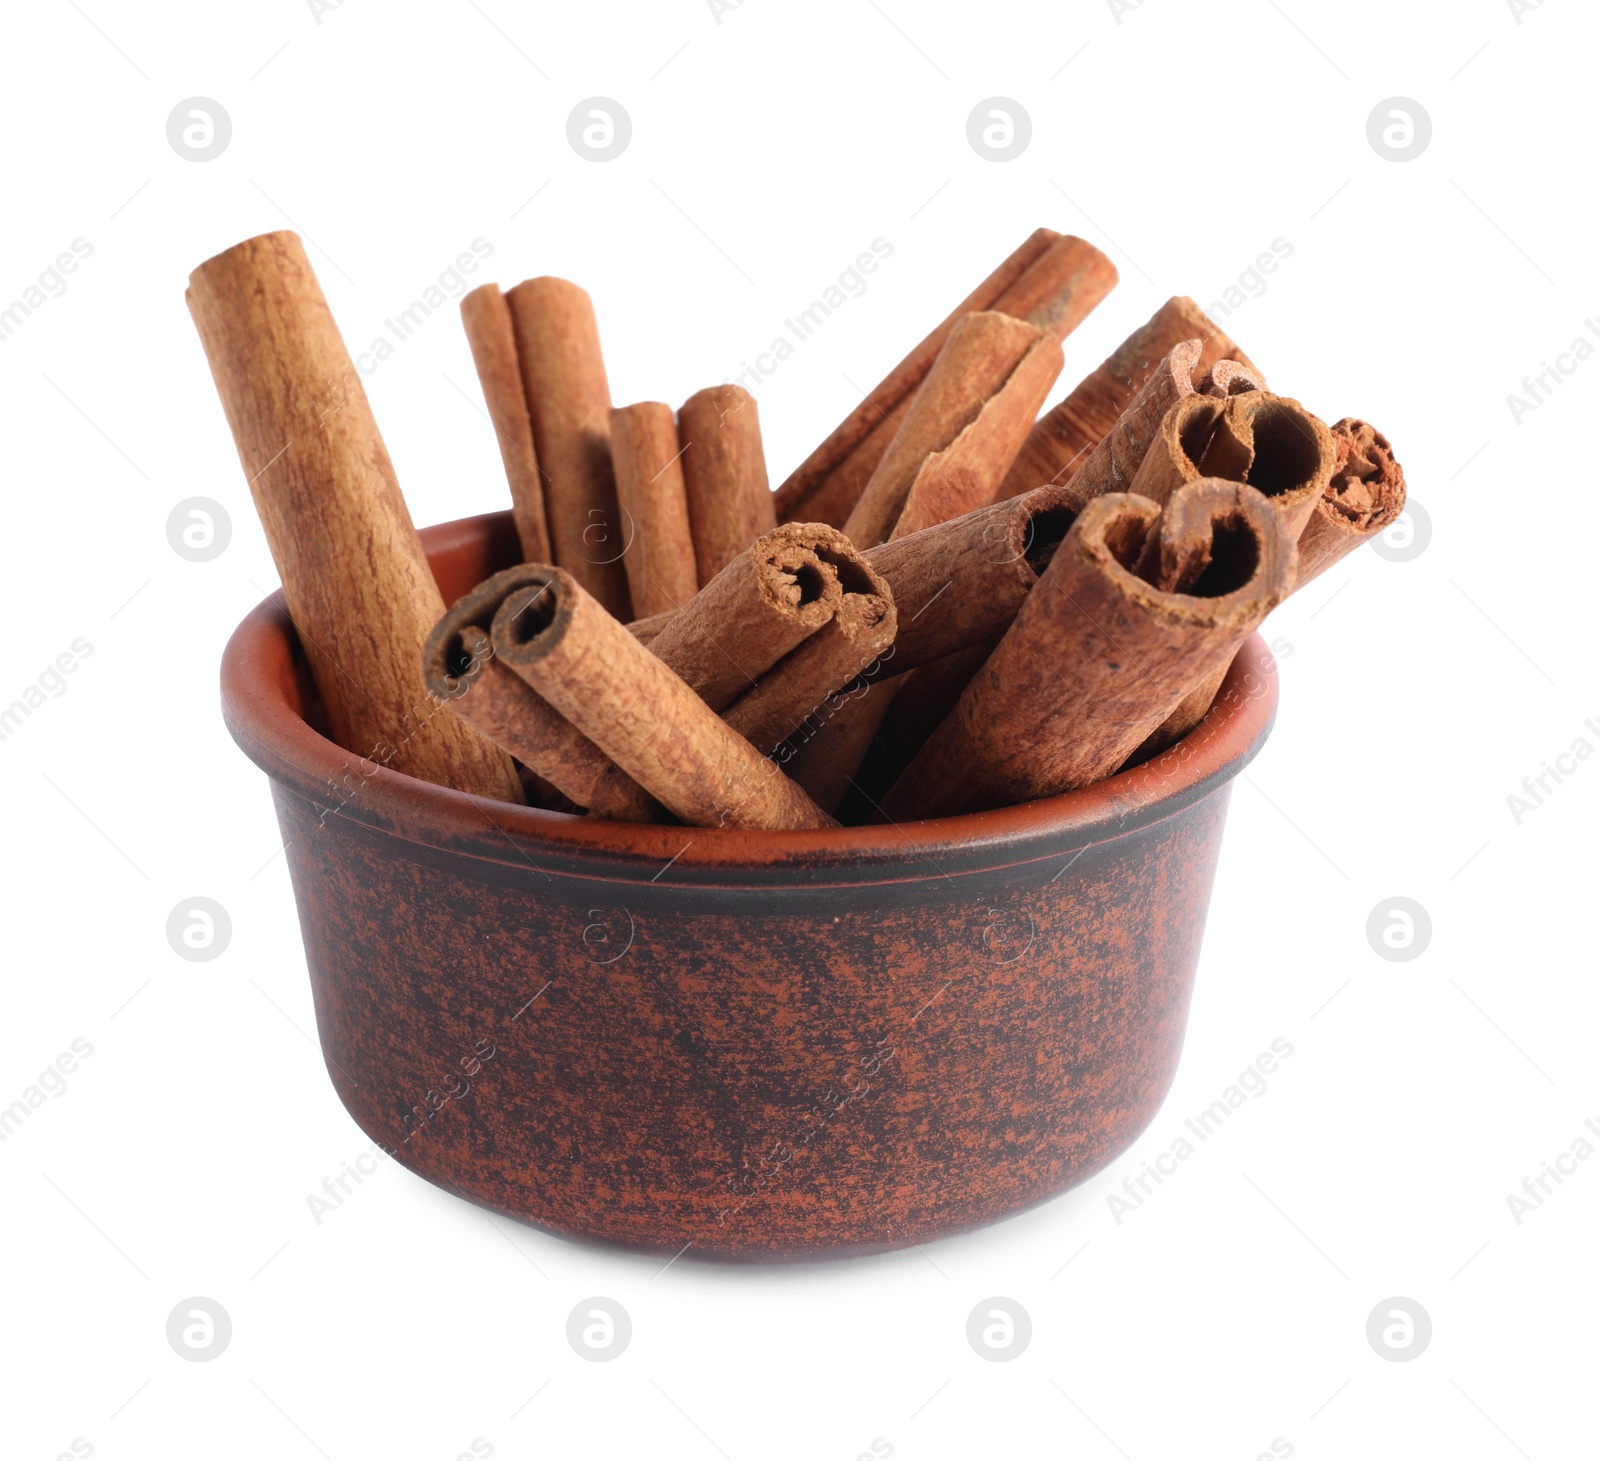 Photo of Dry aromatic cinnamon sticks in bowl isolated on white